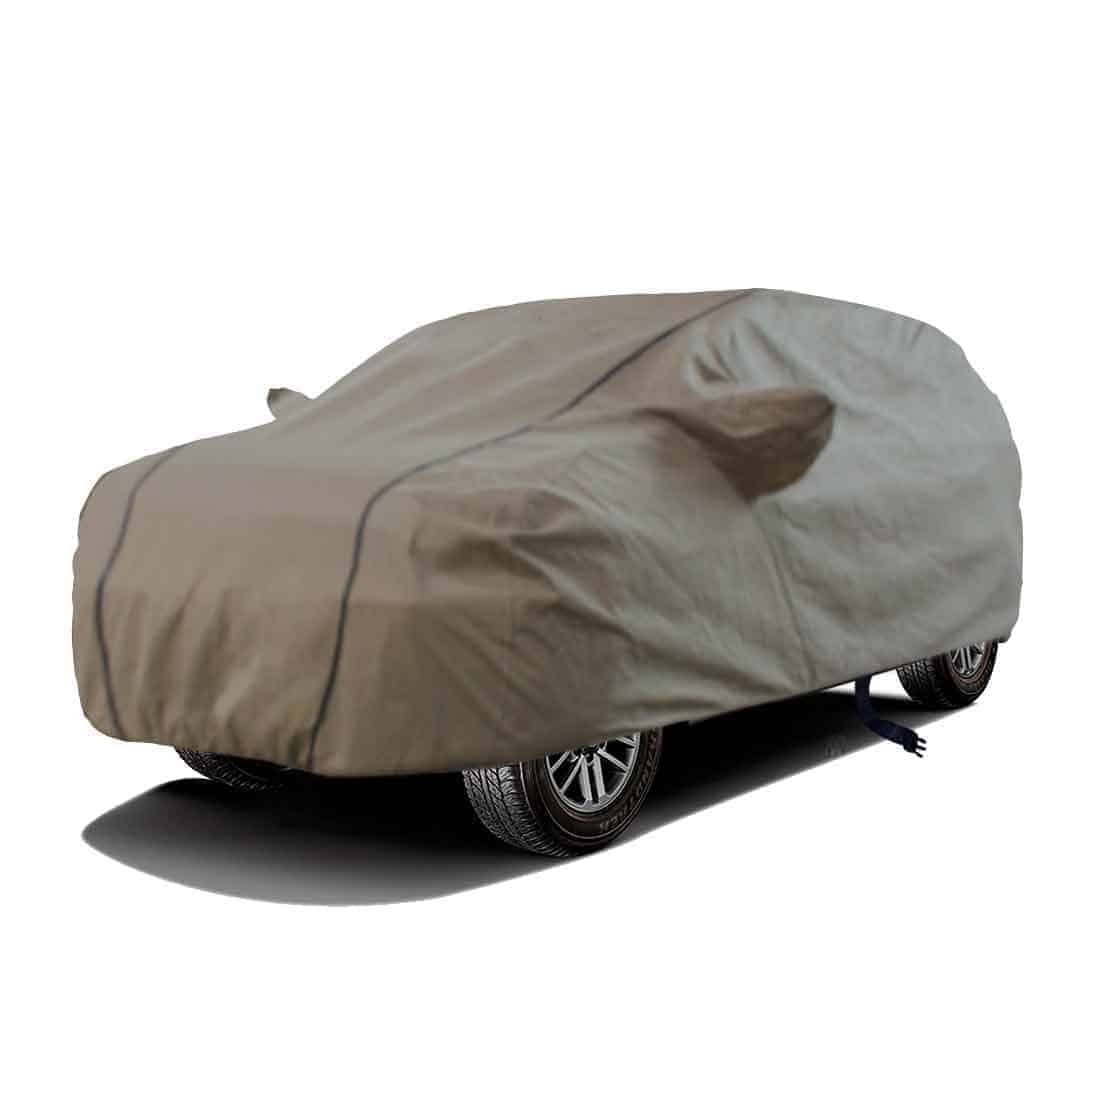 Hyundai Alcazar Car Cover with Antenna Cover, Mirror Pockets, and 100% Water Repellent (K-Series) 